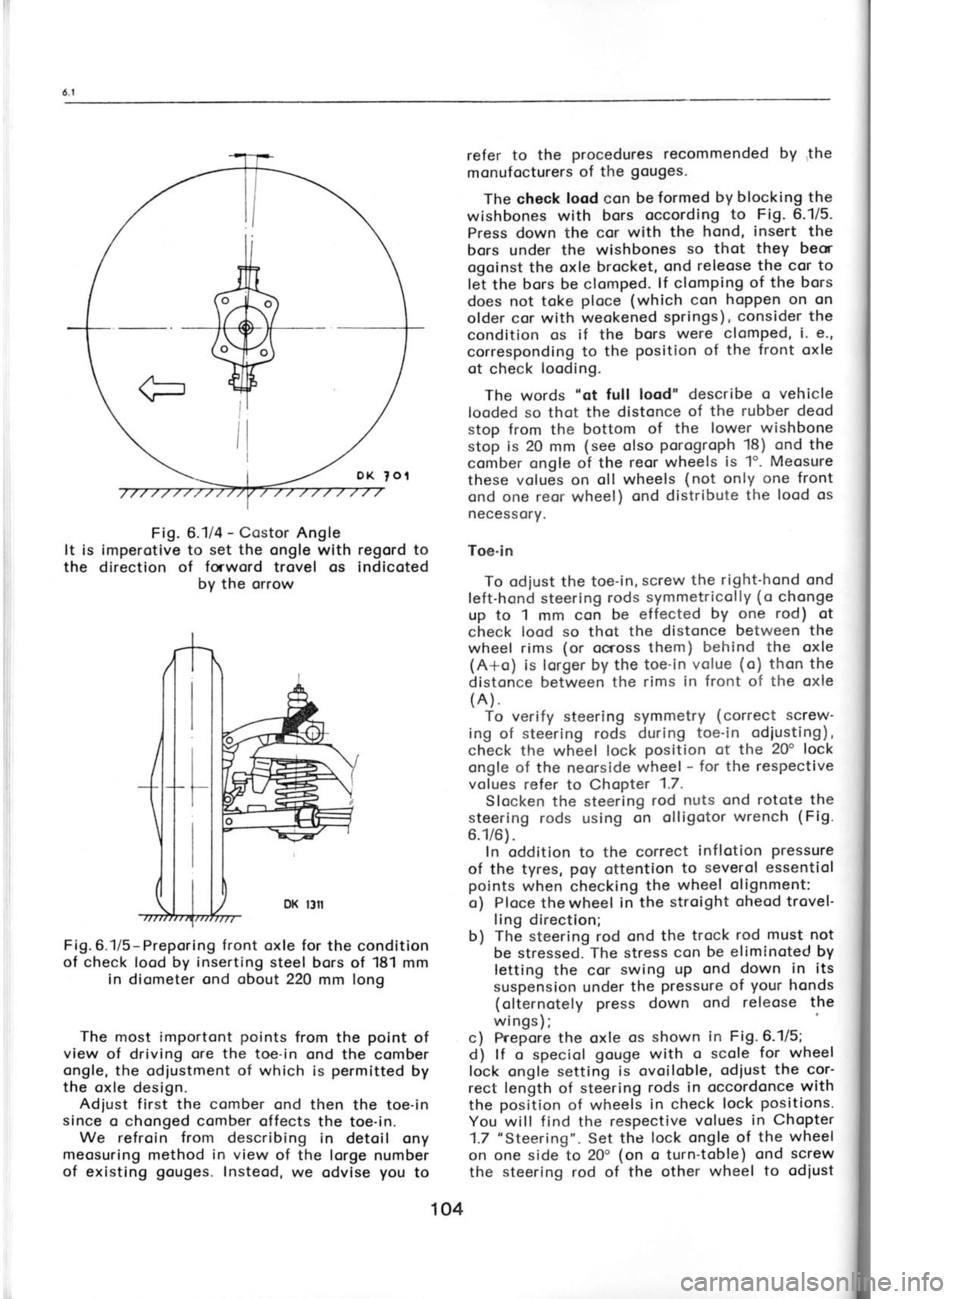 SKODA 120 LS 1980  Workshop Manual *
Fir
il
.-q
Fig. 
6.1/4  - 
Costor Angle
It is imperotive to  set the 
ongle with  regord to
the  direction  of forword 
trovel  os  indicoted
by  the  orrow
Fig.6.1/5-Preporing front oxle  for the c